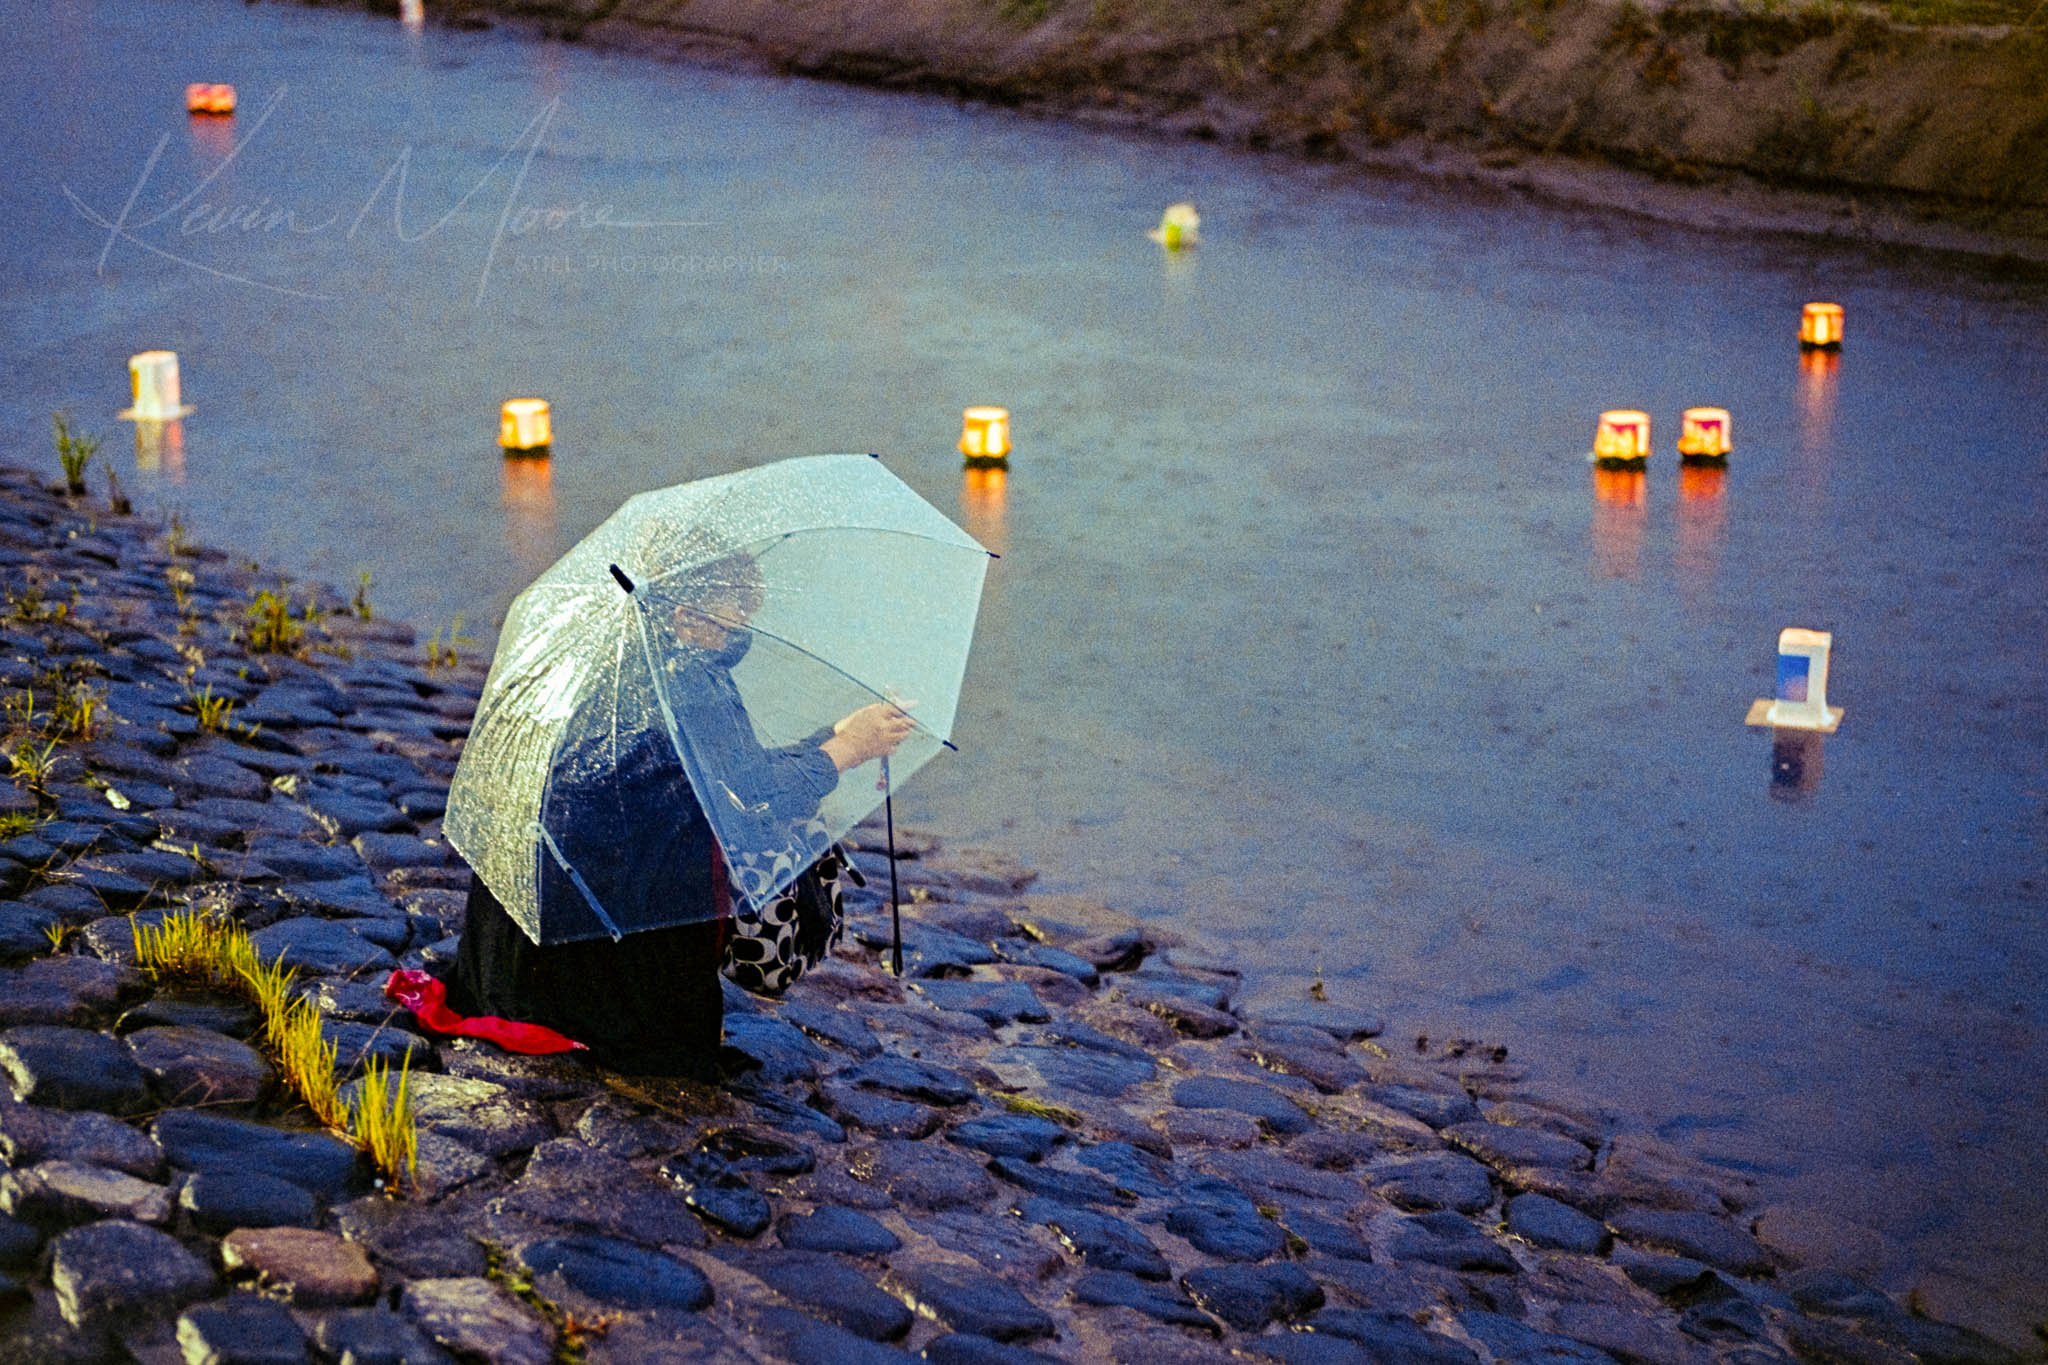 Woman under umbrella releasing glowing lanterns on cobblestones near tranquil waters at twilight.